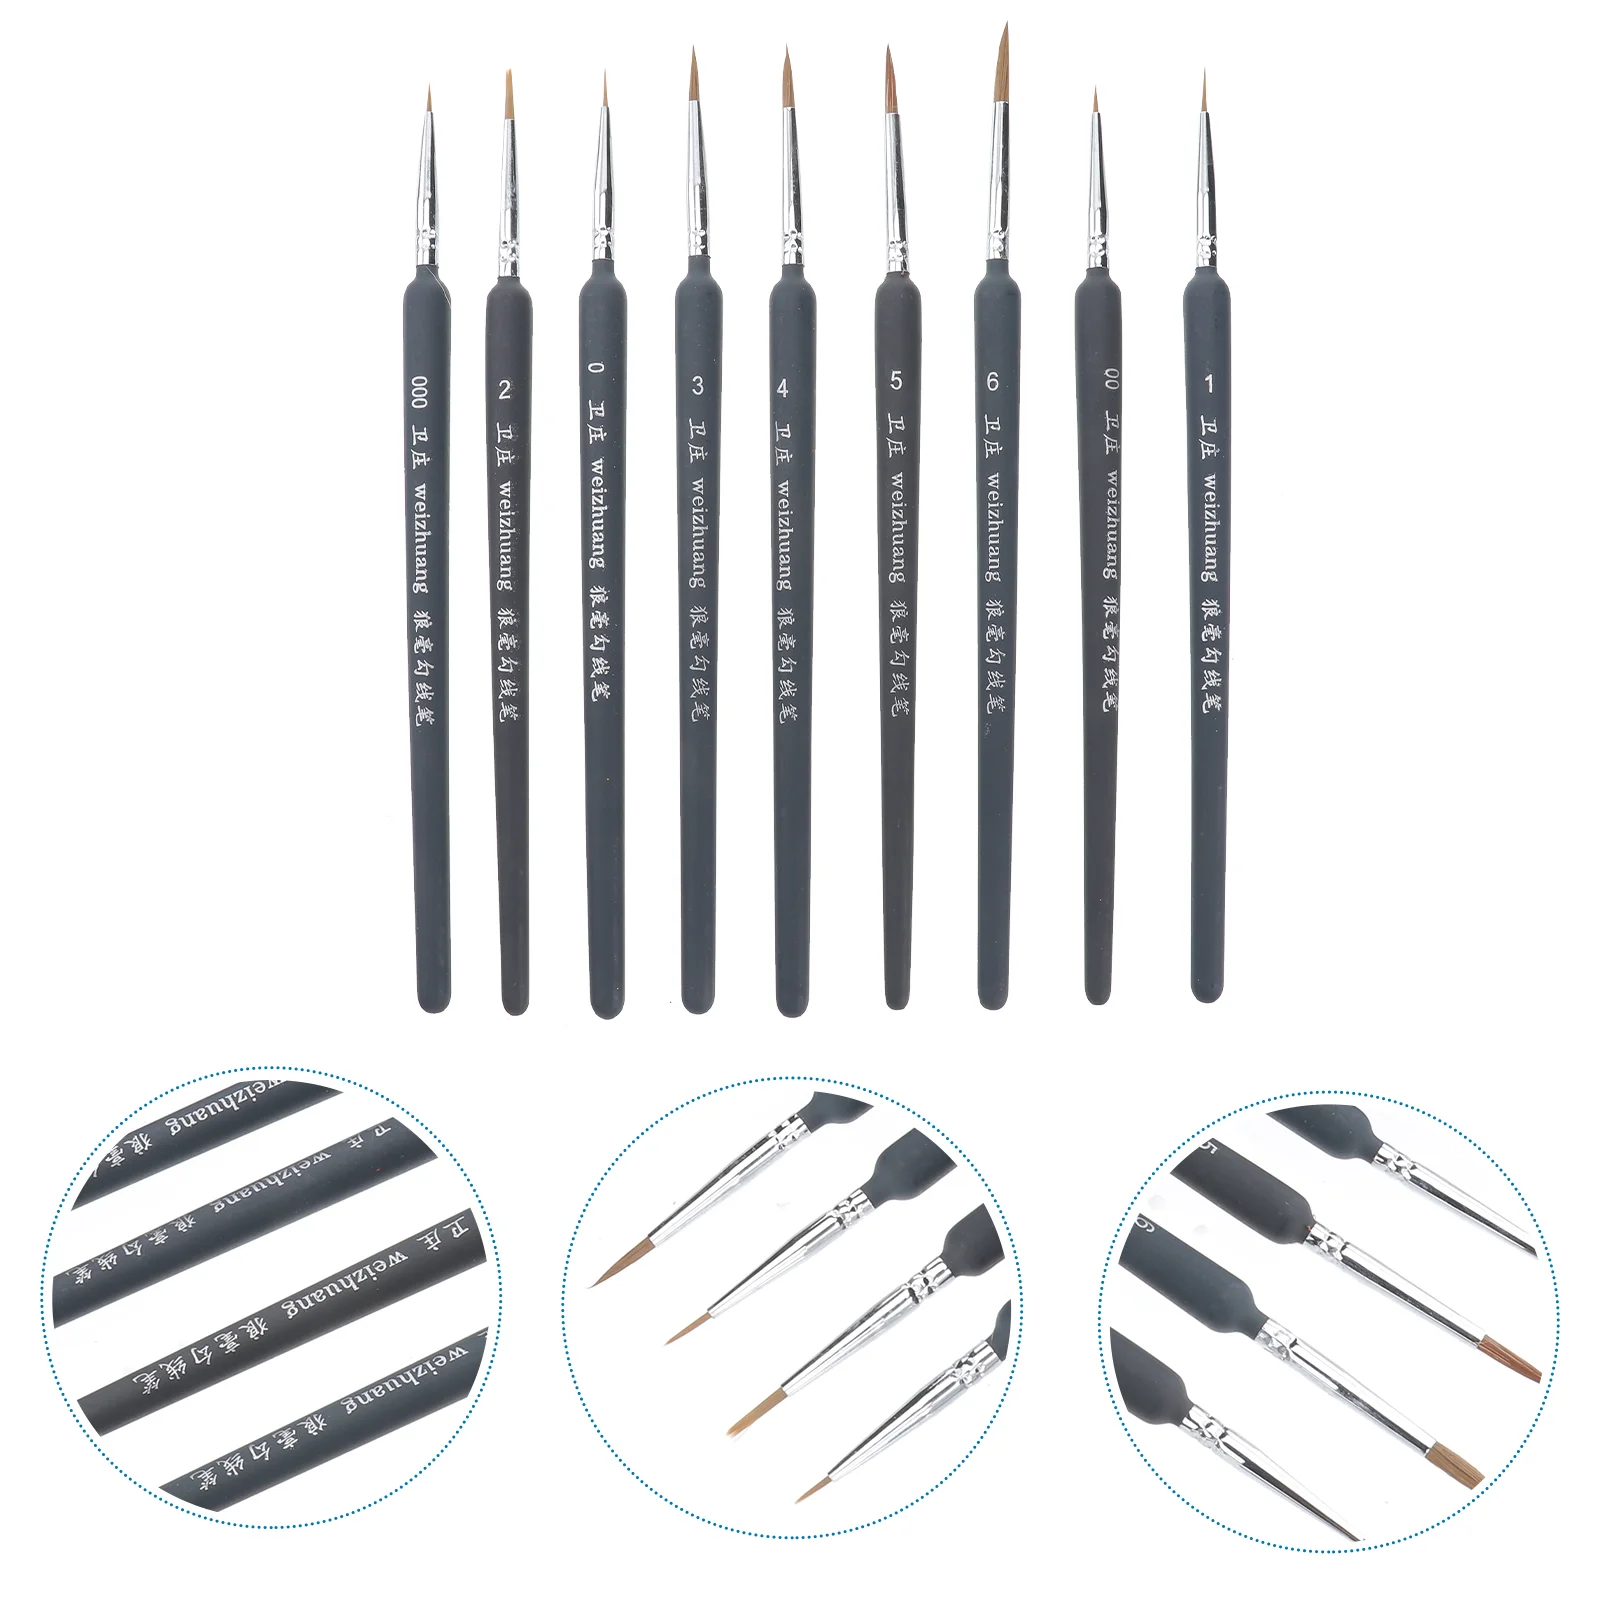 

9pcs Detail Brush Wooden Handle Professional Fine Tip Oil Painting Brushes Watercolor Painting Accessories for Beginner Artist